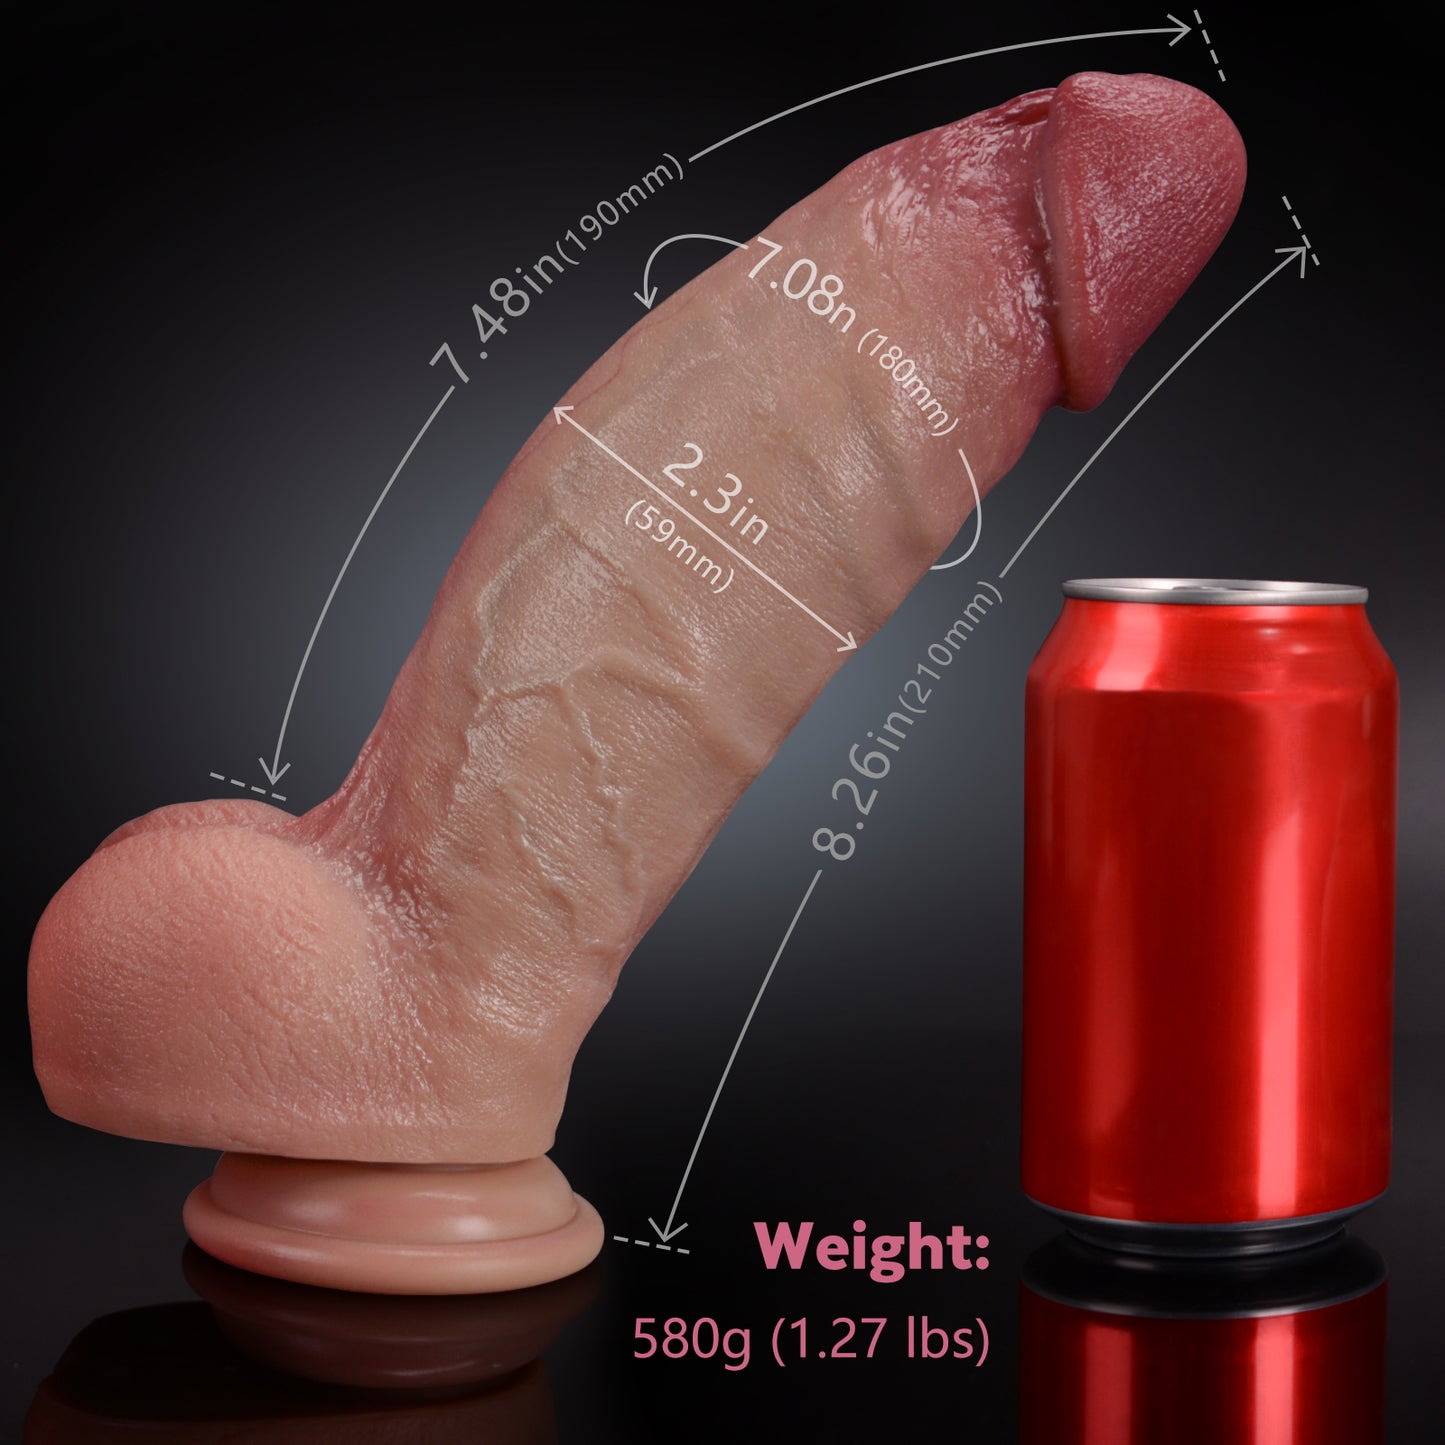 The Don Small Glans Thick Dildo